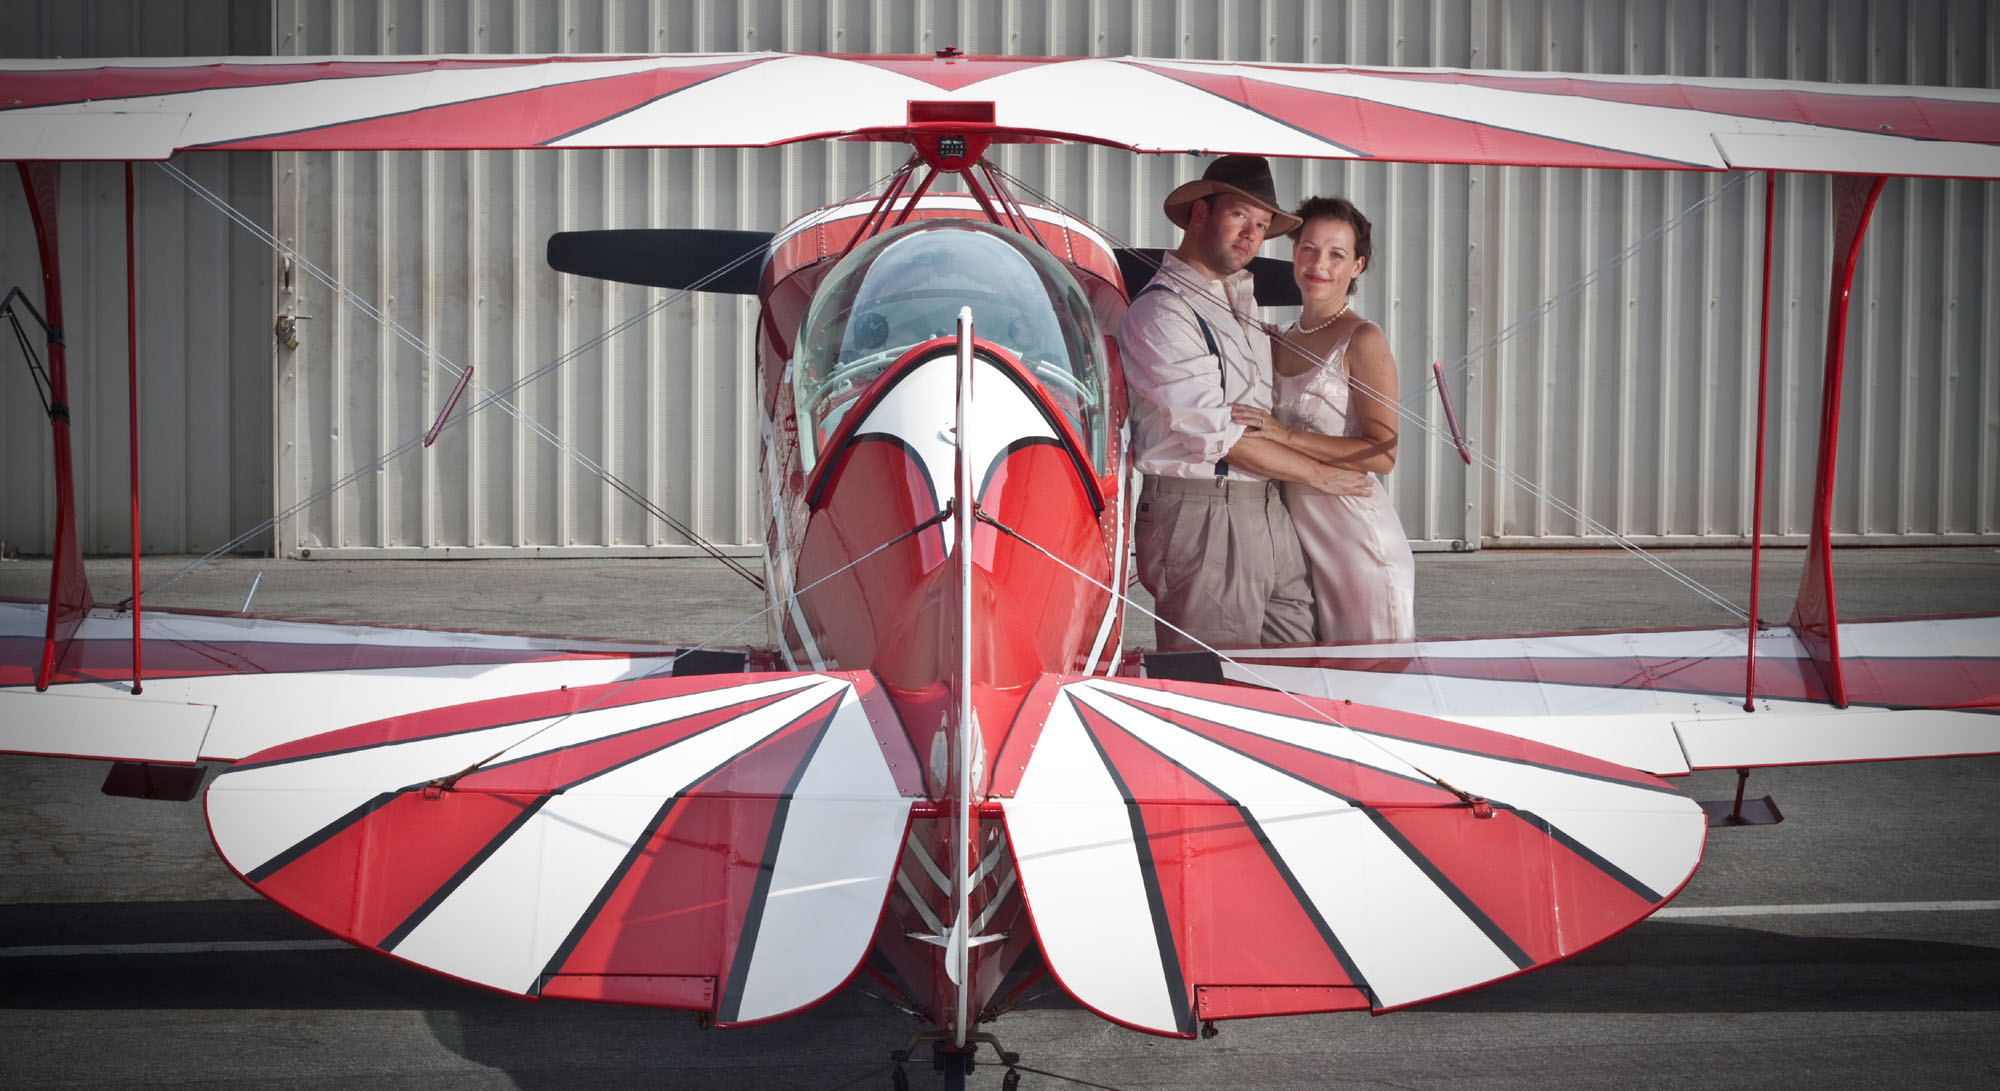 A 1930's-era aviation-themed photo shoot at John Wayne Airport with my wife and our Pitts S-2B biplane